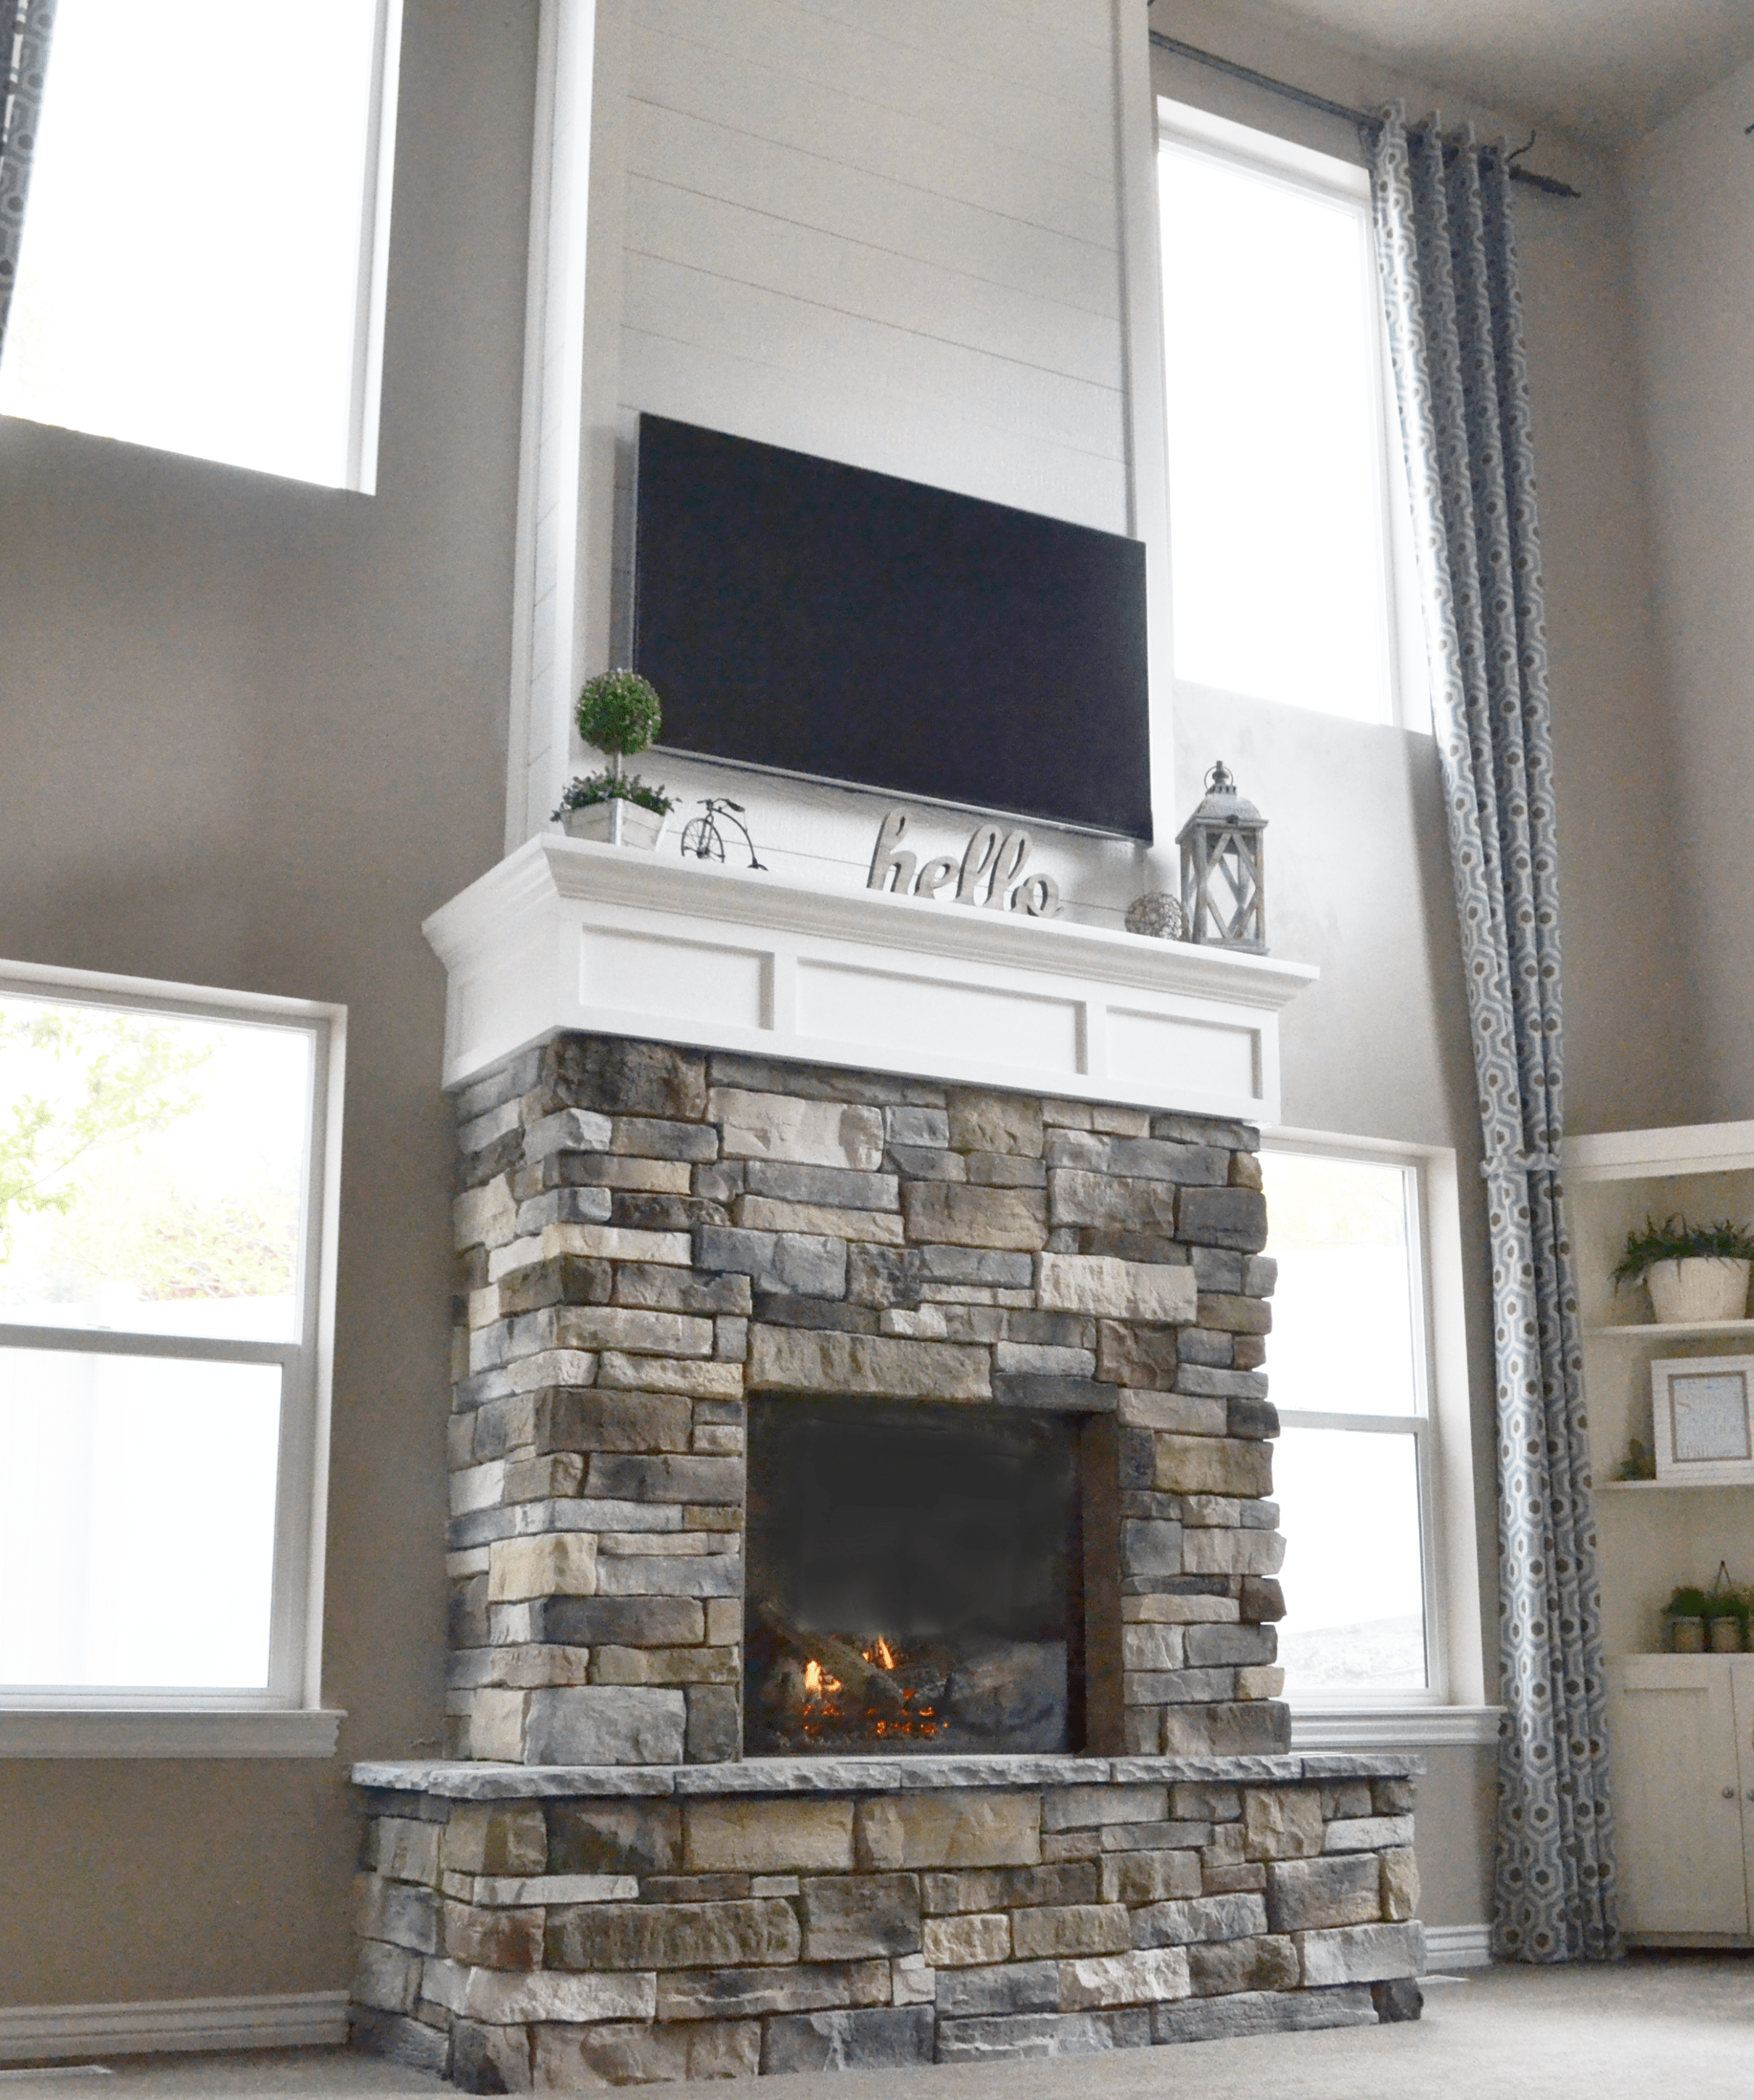 Diy Fireplace Mantel Ideas Elegant Diy Fireplace with Stone & Shiplap for the Home